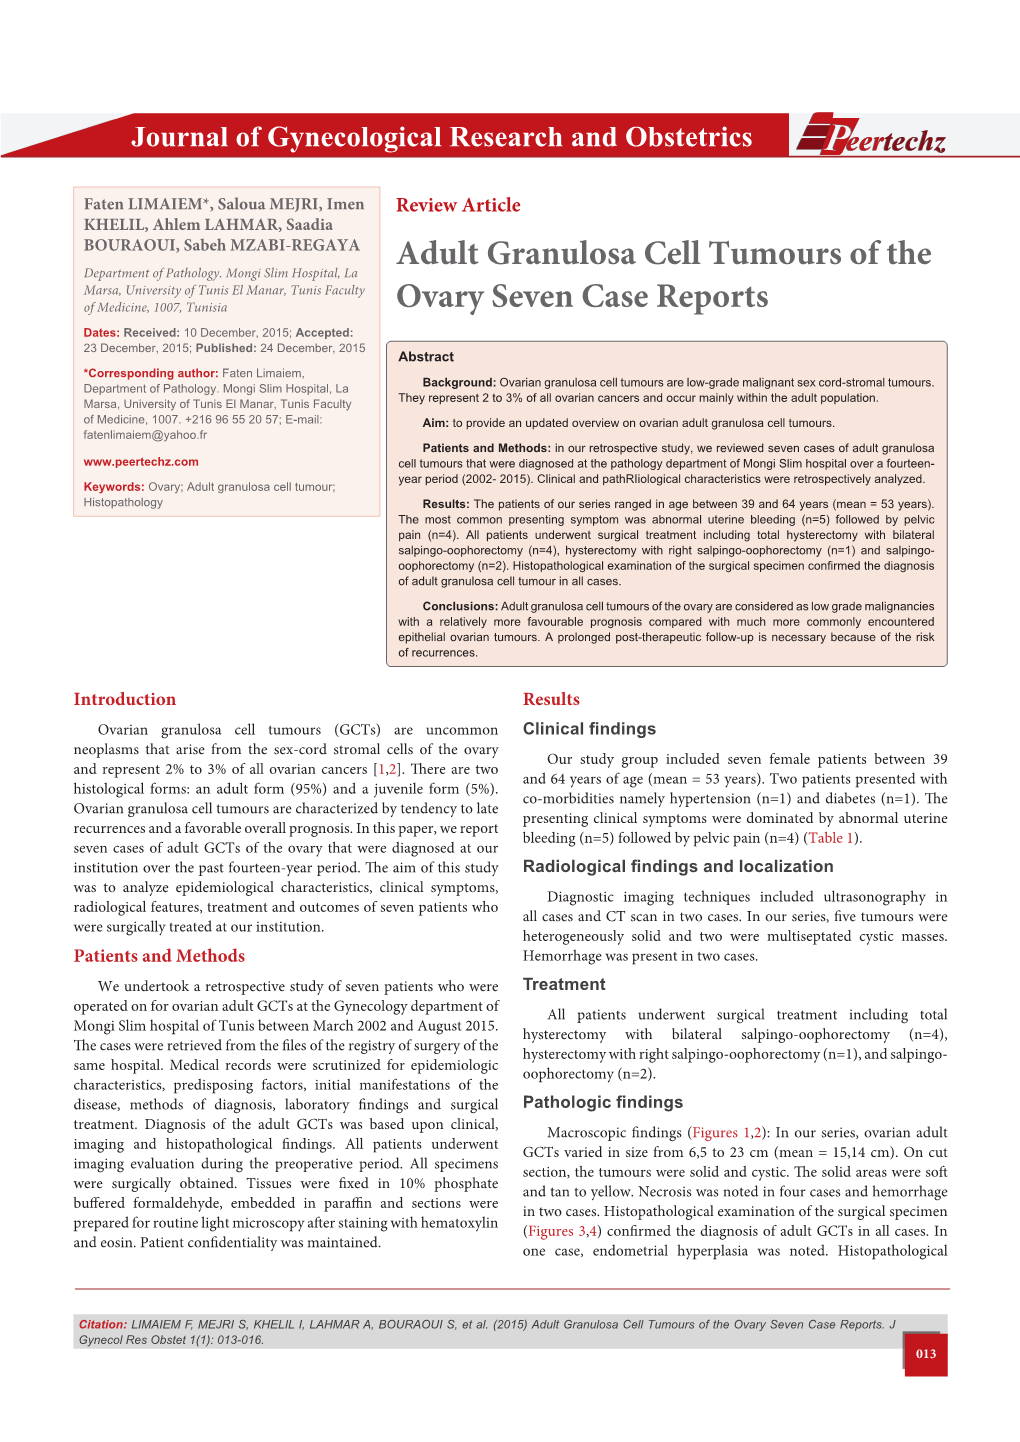 Adult Granulosa Cell Tumours of the Ovary Seven Case Reports